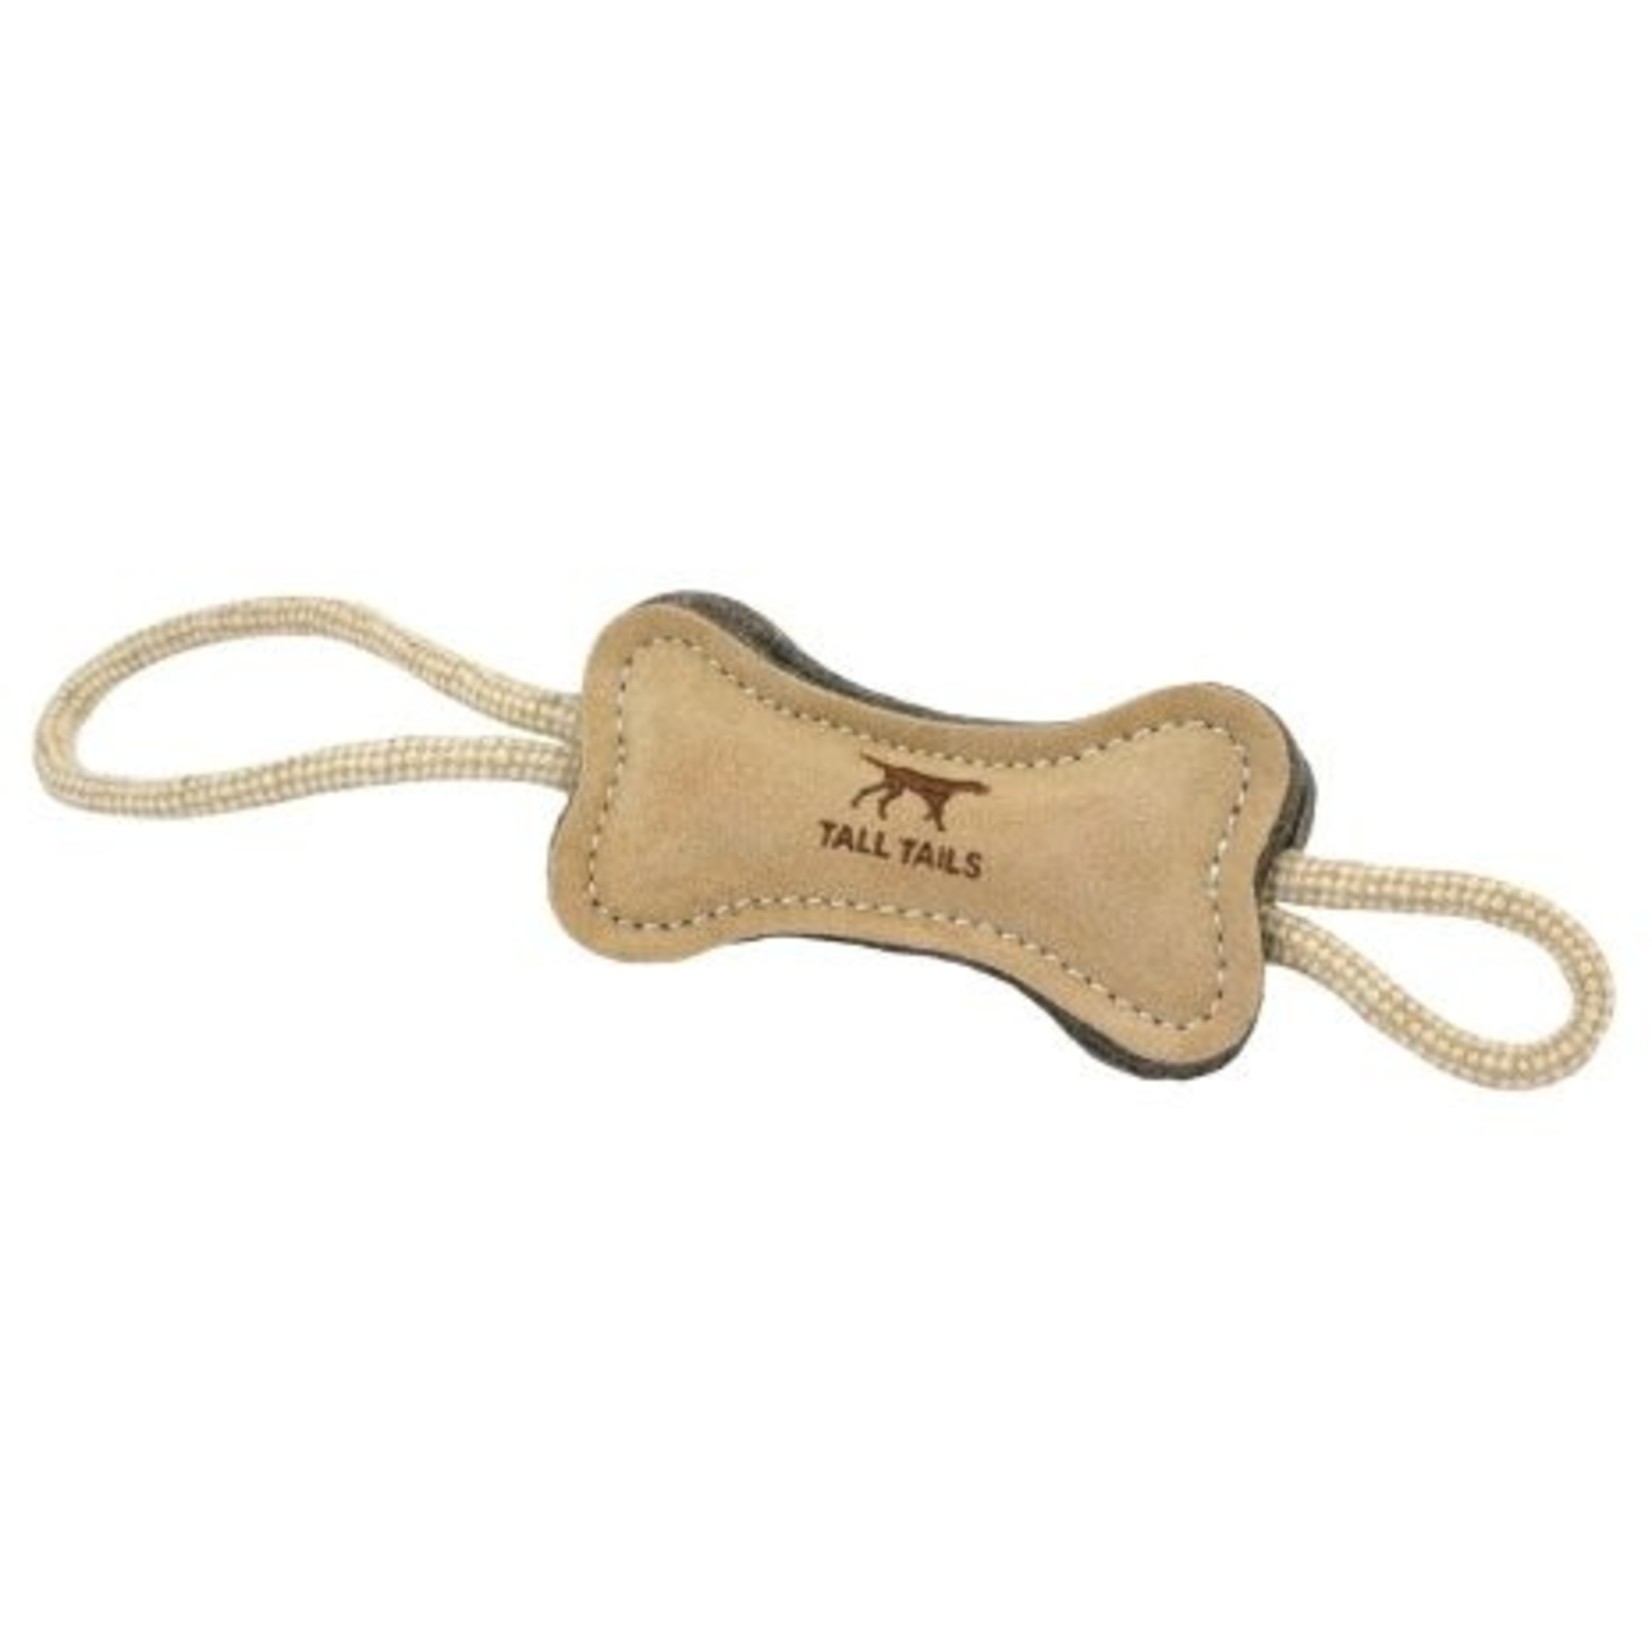 Tall Tails Tall Tails natural leather dog tug toy 16"